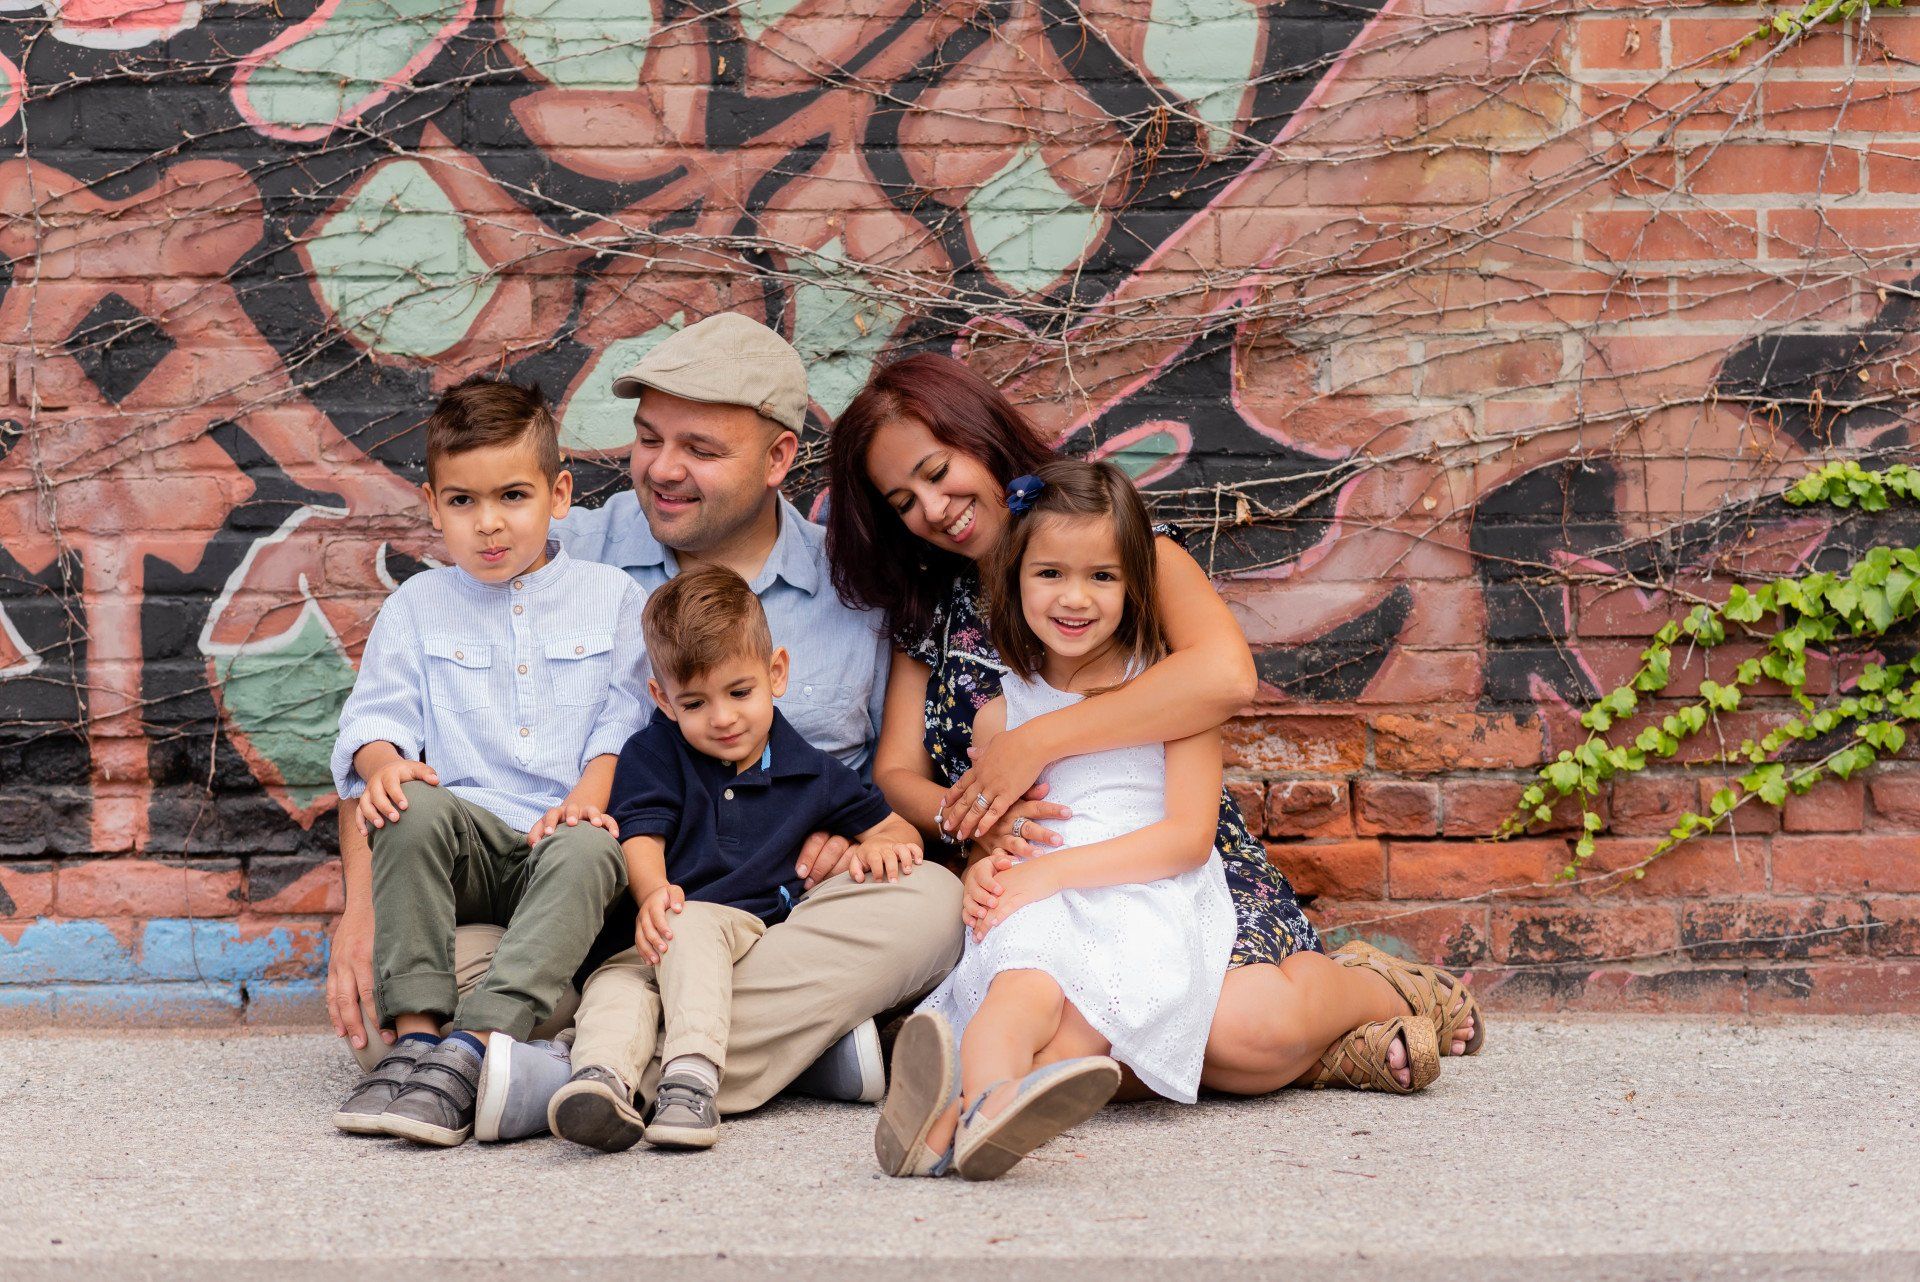 Lifestyle photography Toronto | Stacey Naglie |  Man, woman and three children in front of graffiti covered wall